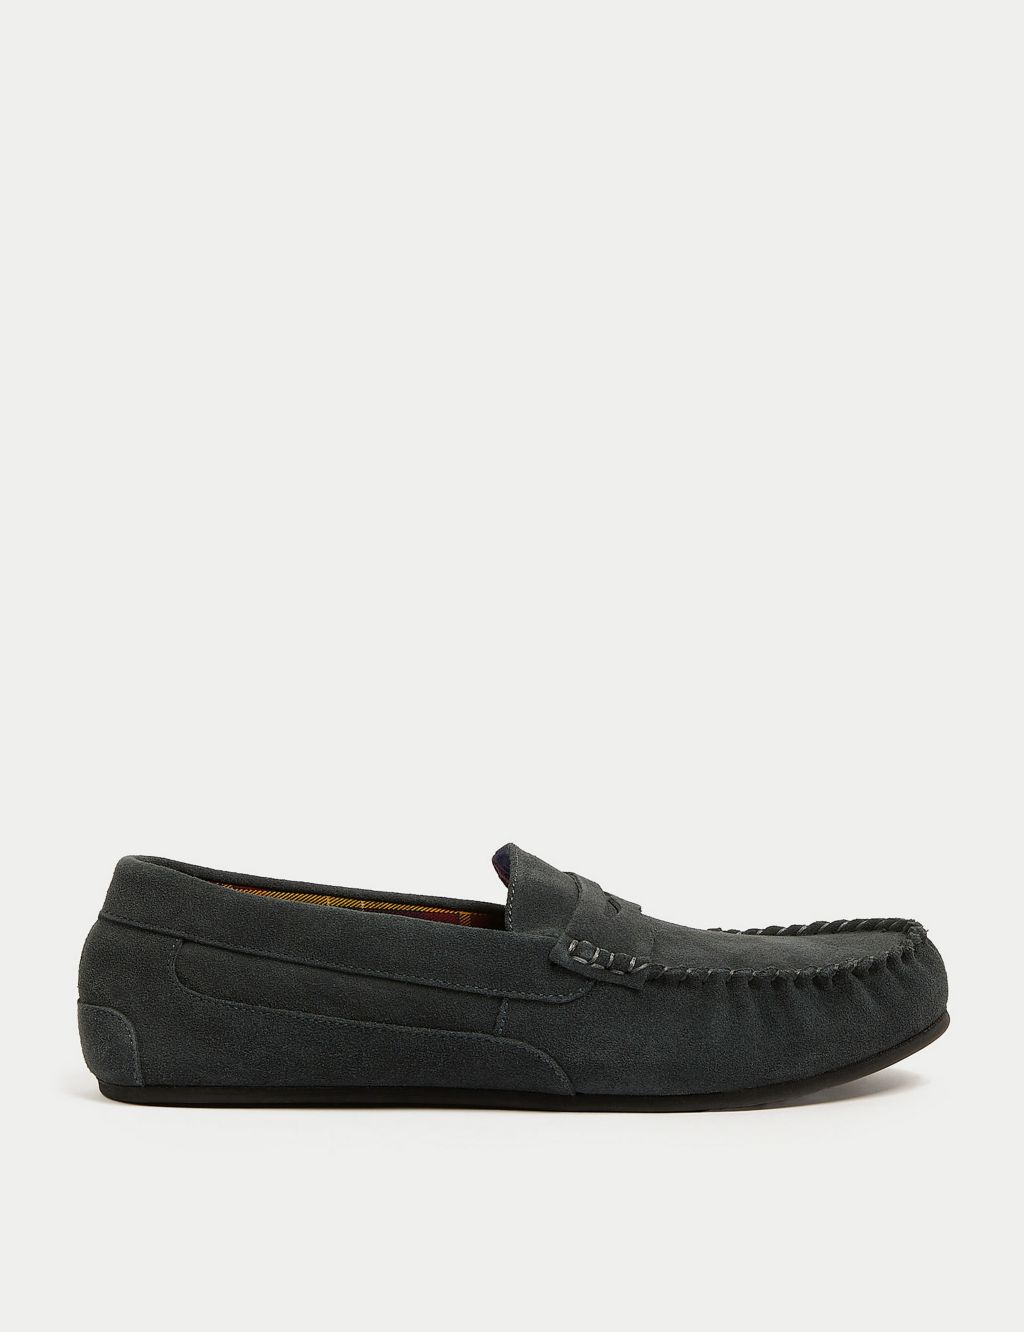 Suede Moccasin Slippers image 1